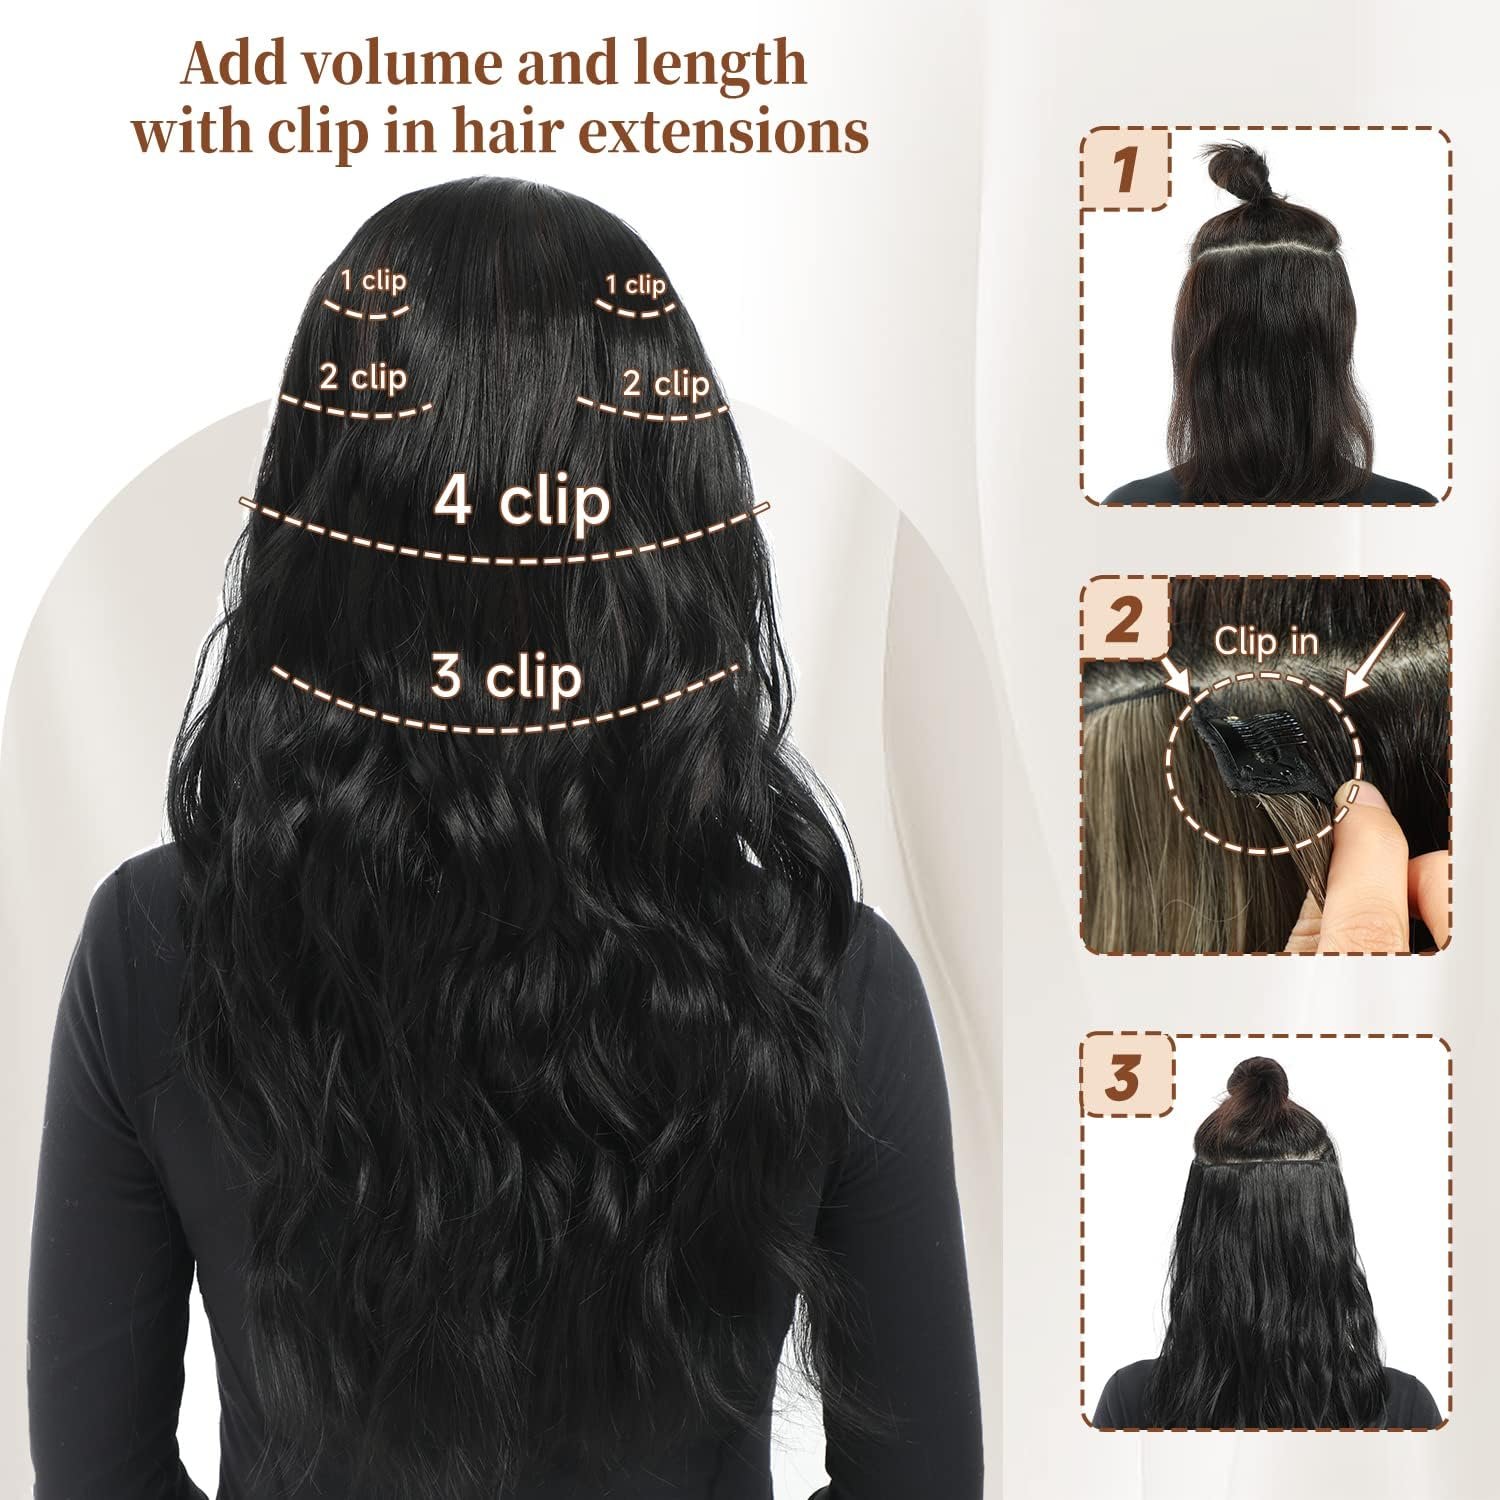 Clip in Black Hair Extensions Review